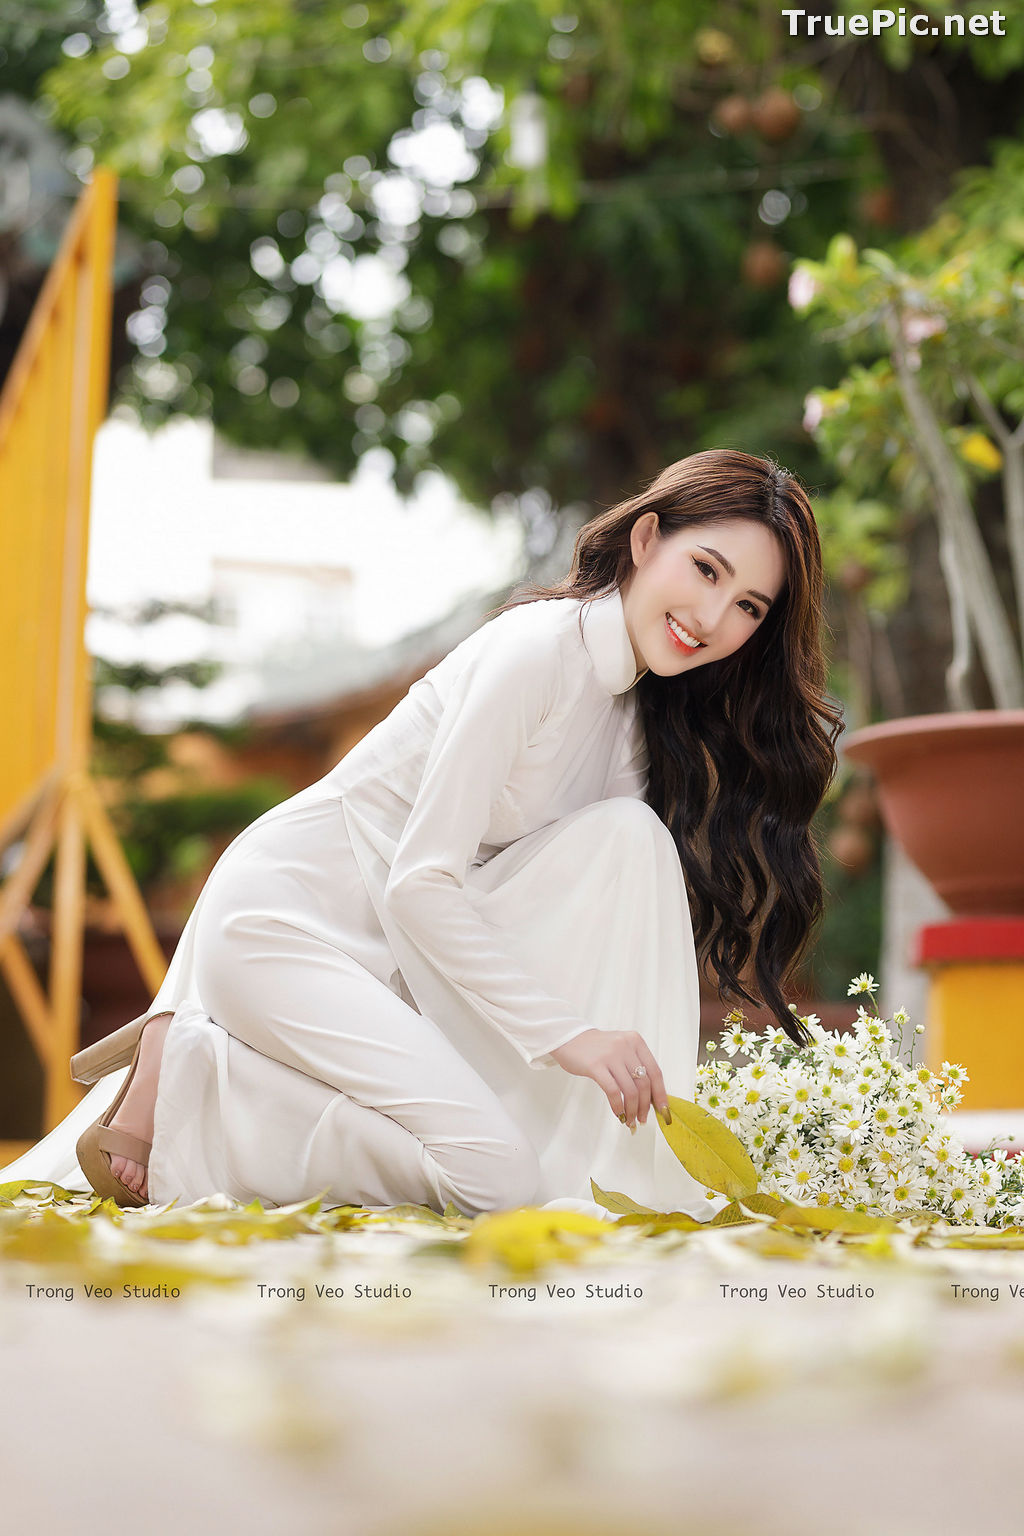 Image The Beauty of Vietnamese Girls with Traditional Dress (Ao Dai) #3 - TruePic.net - Picture-25